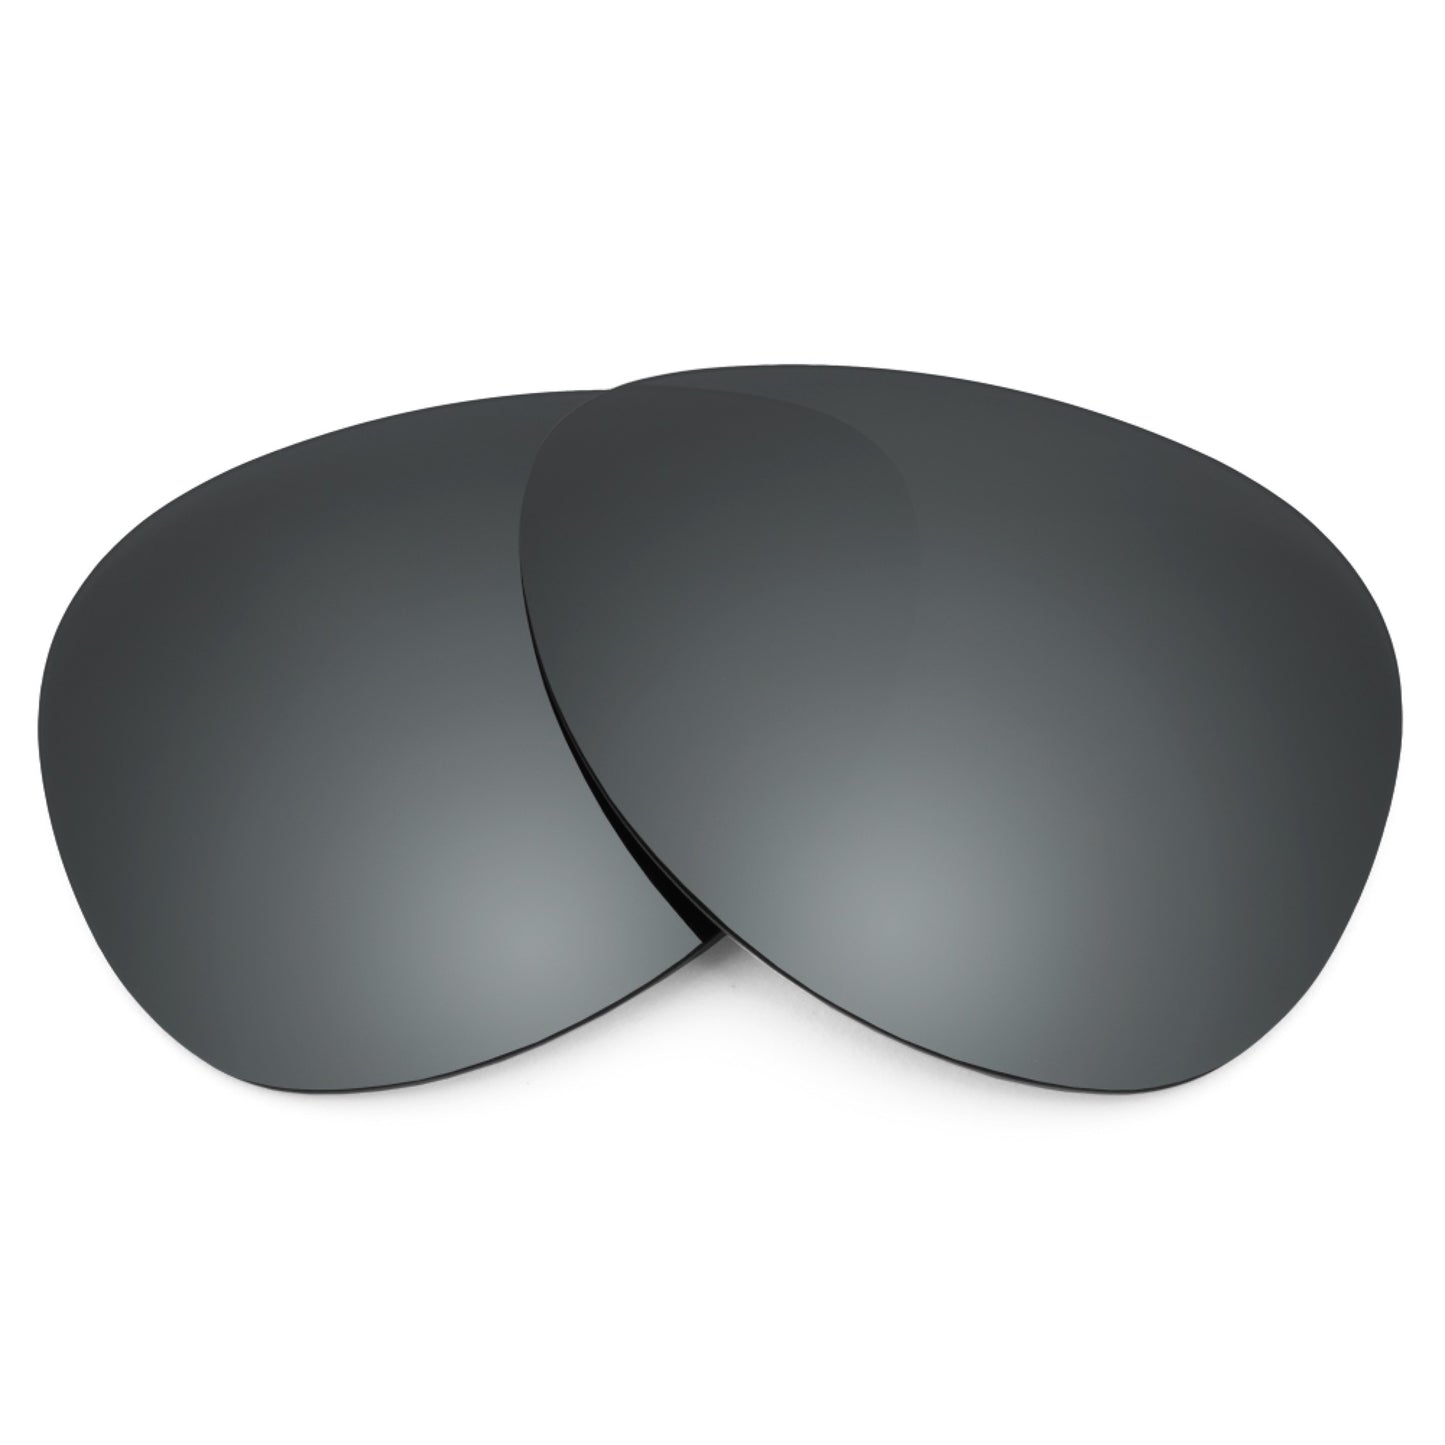 Revant replacement lenses for Ray-Ban Outdoorsman II Rainbow RB3407 58mm Non-Polarized Black Chrome